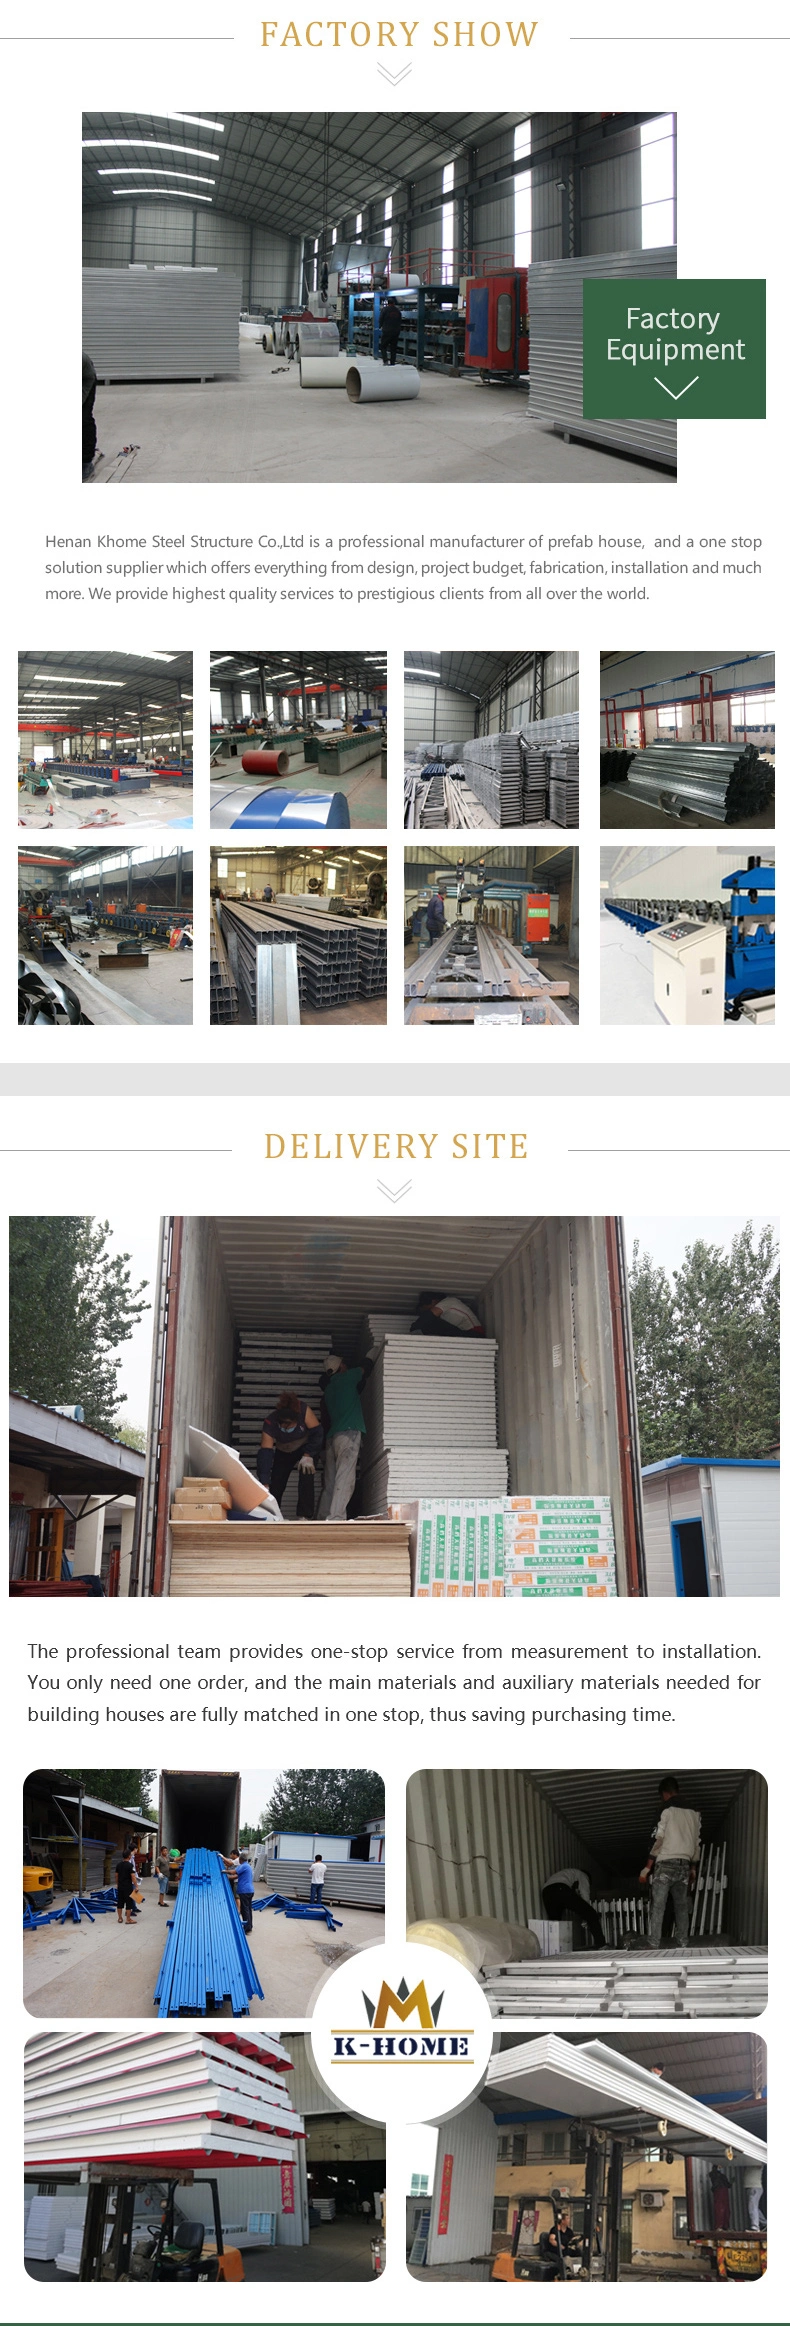 Single Story Prefab Container Homes Worker Dormitory for 24 People